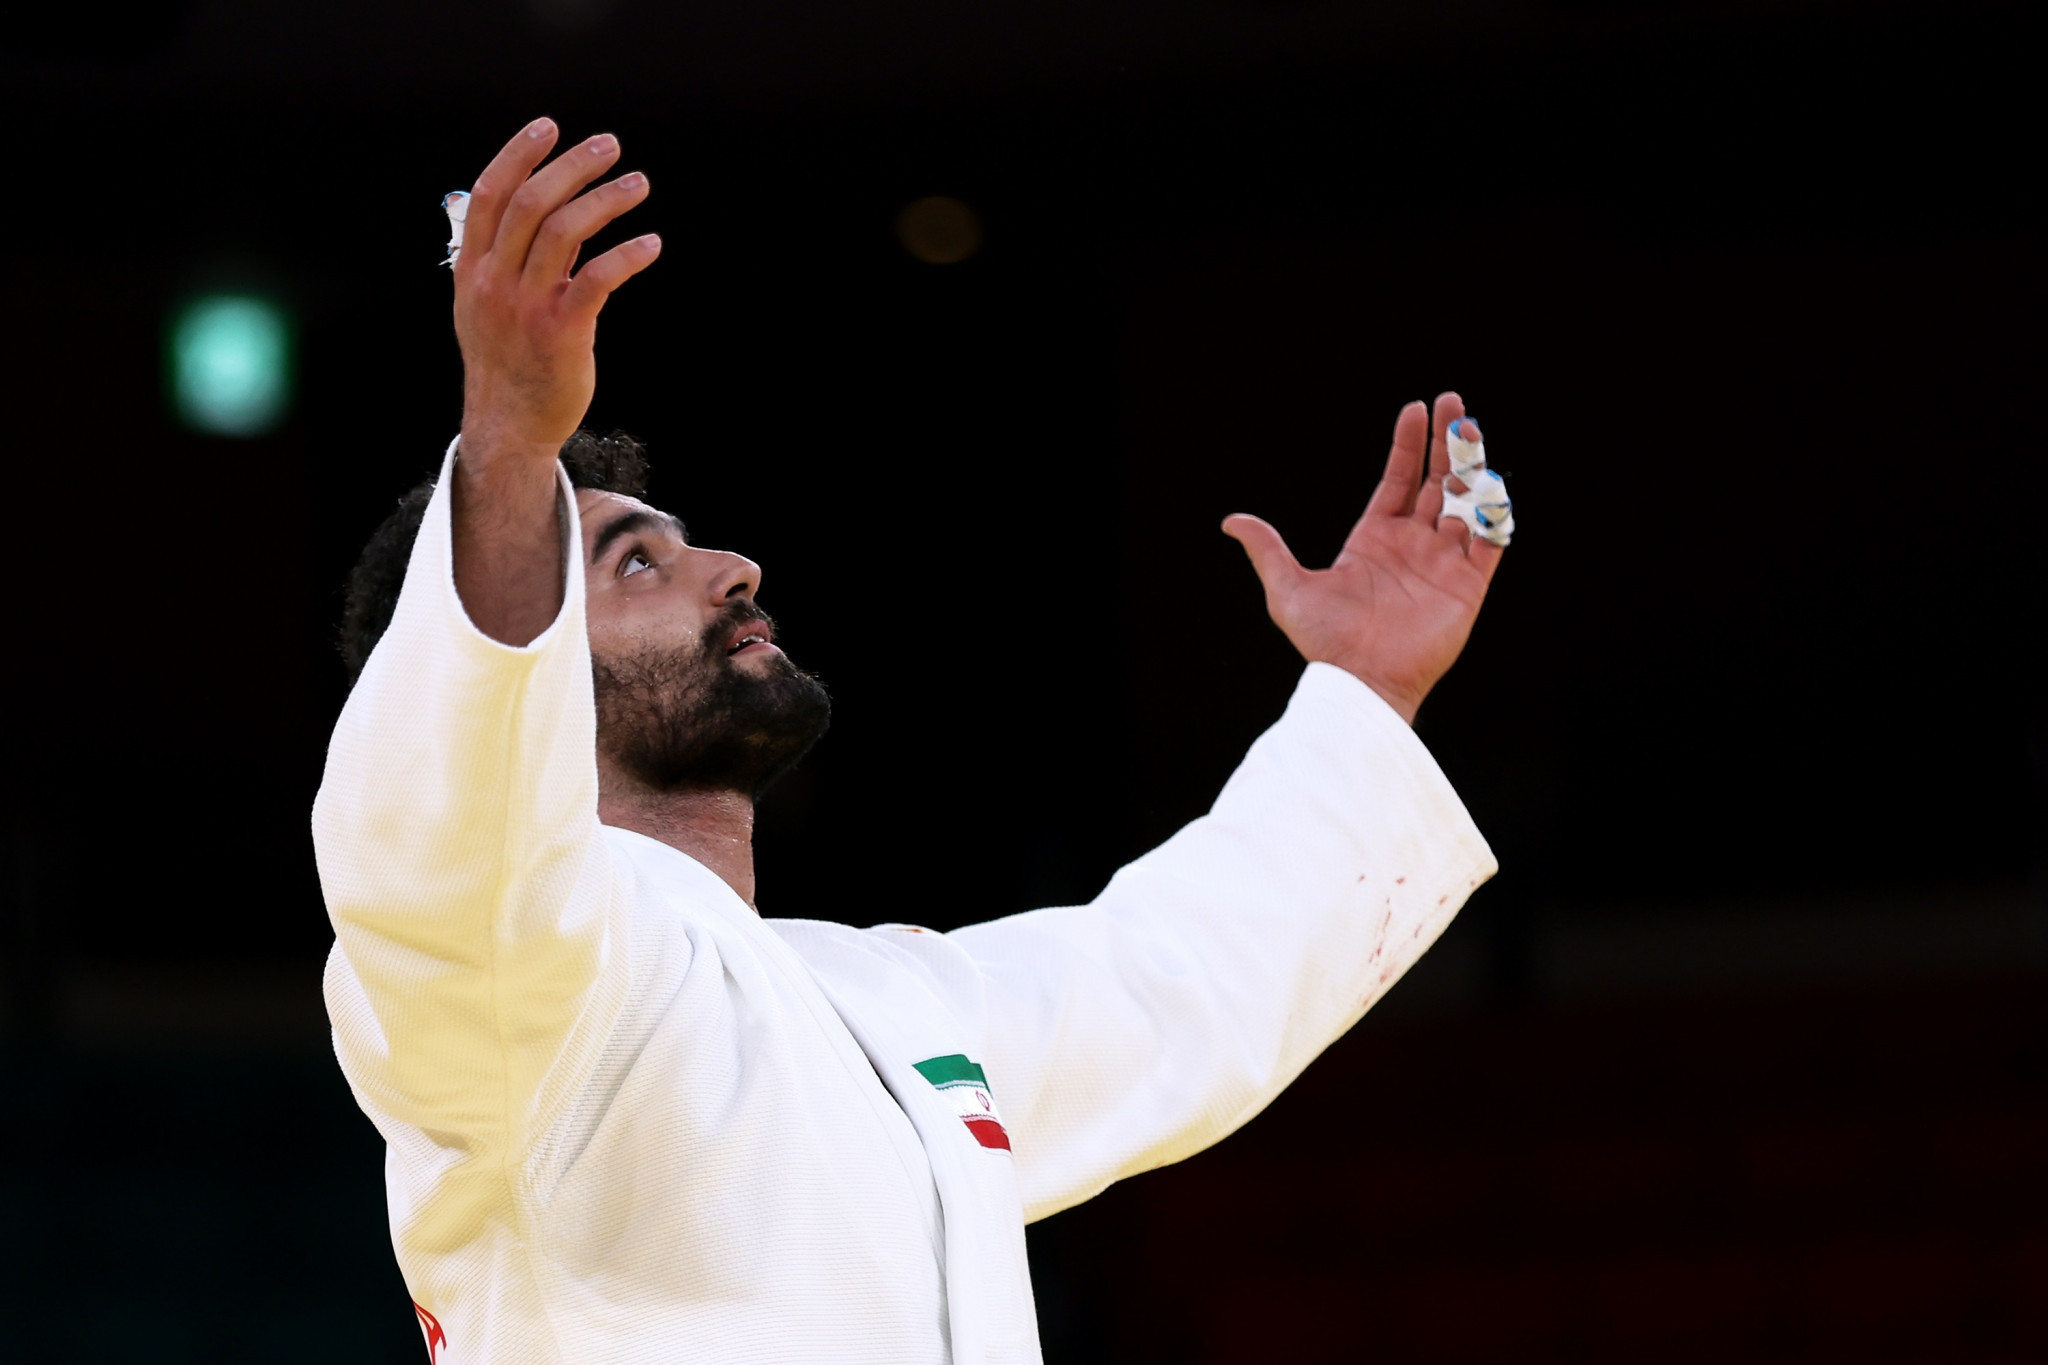 Exclusive: IJF President promises Iran "welcome back" in September after ban